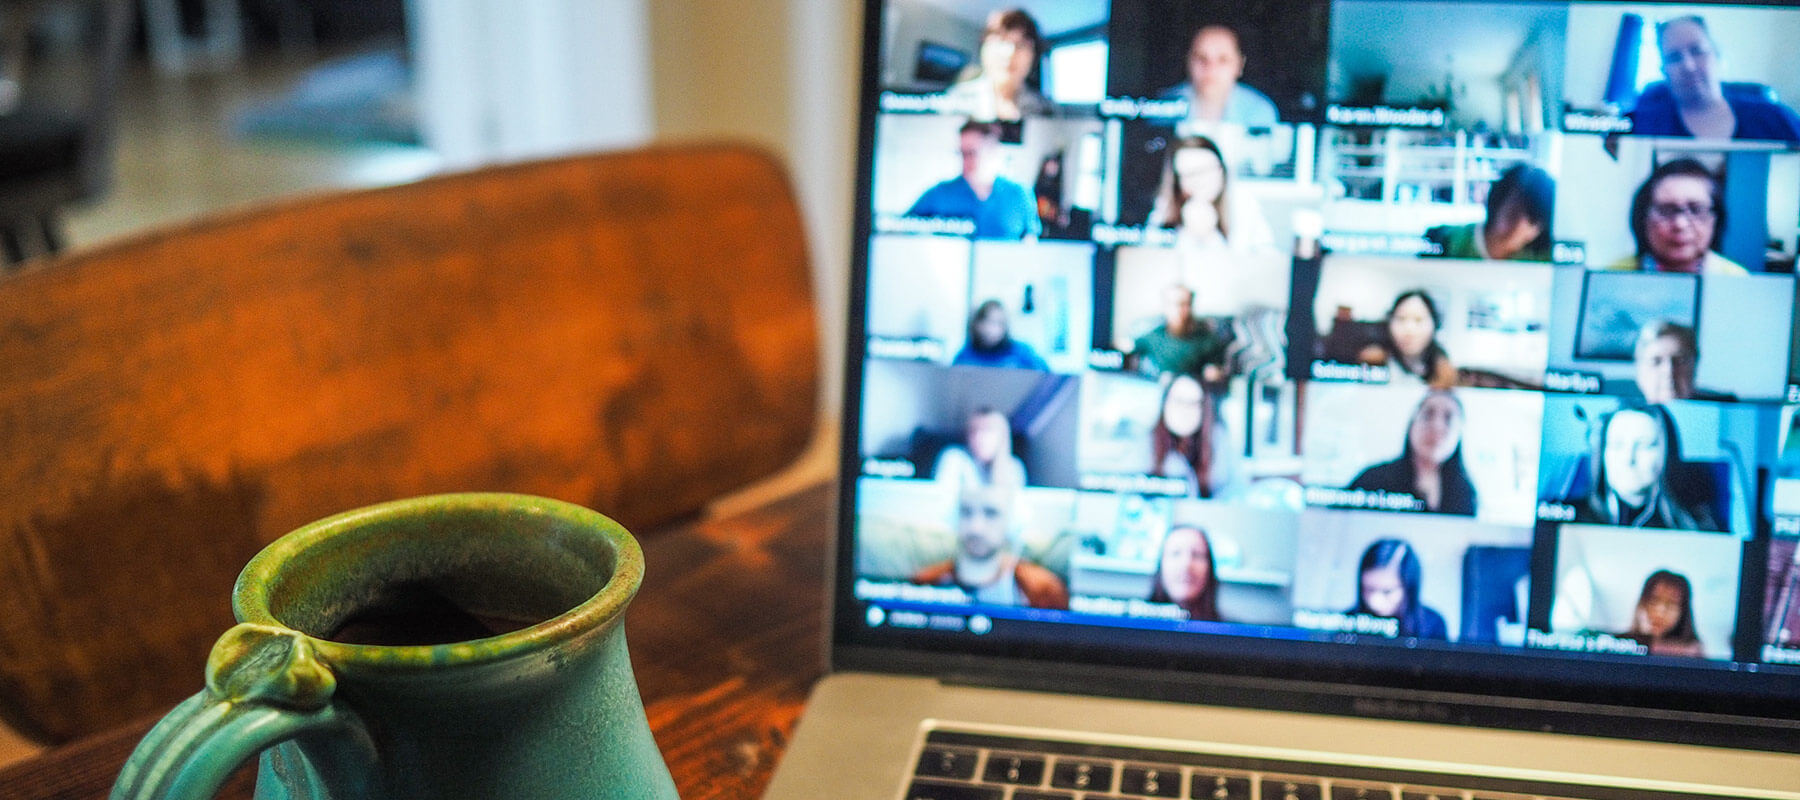 A mug near a laptop with a zoom meeting on the screen